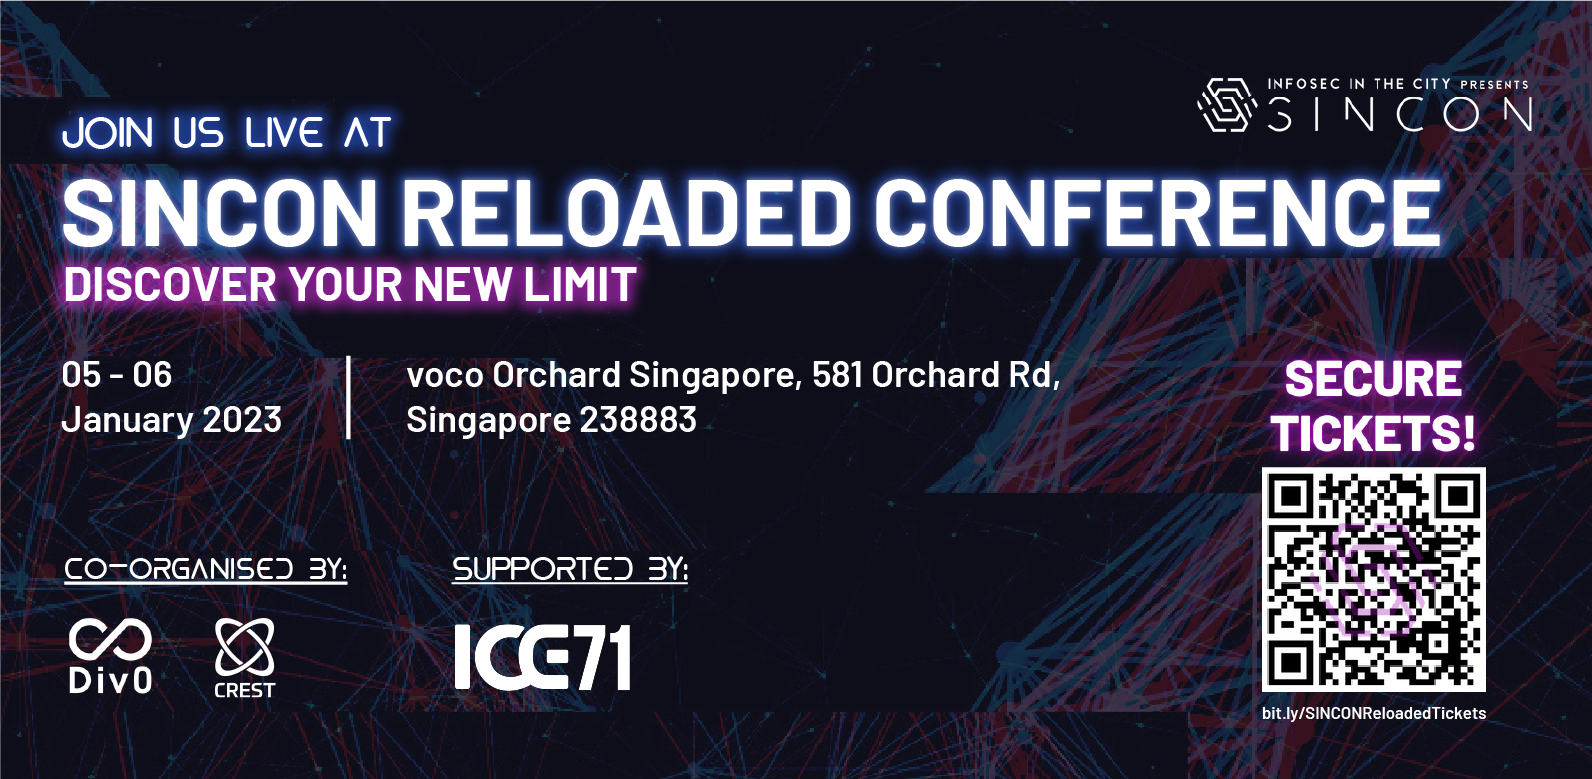 ICE71 at SINCON Reloaded Conference